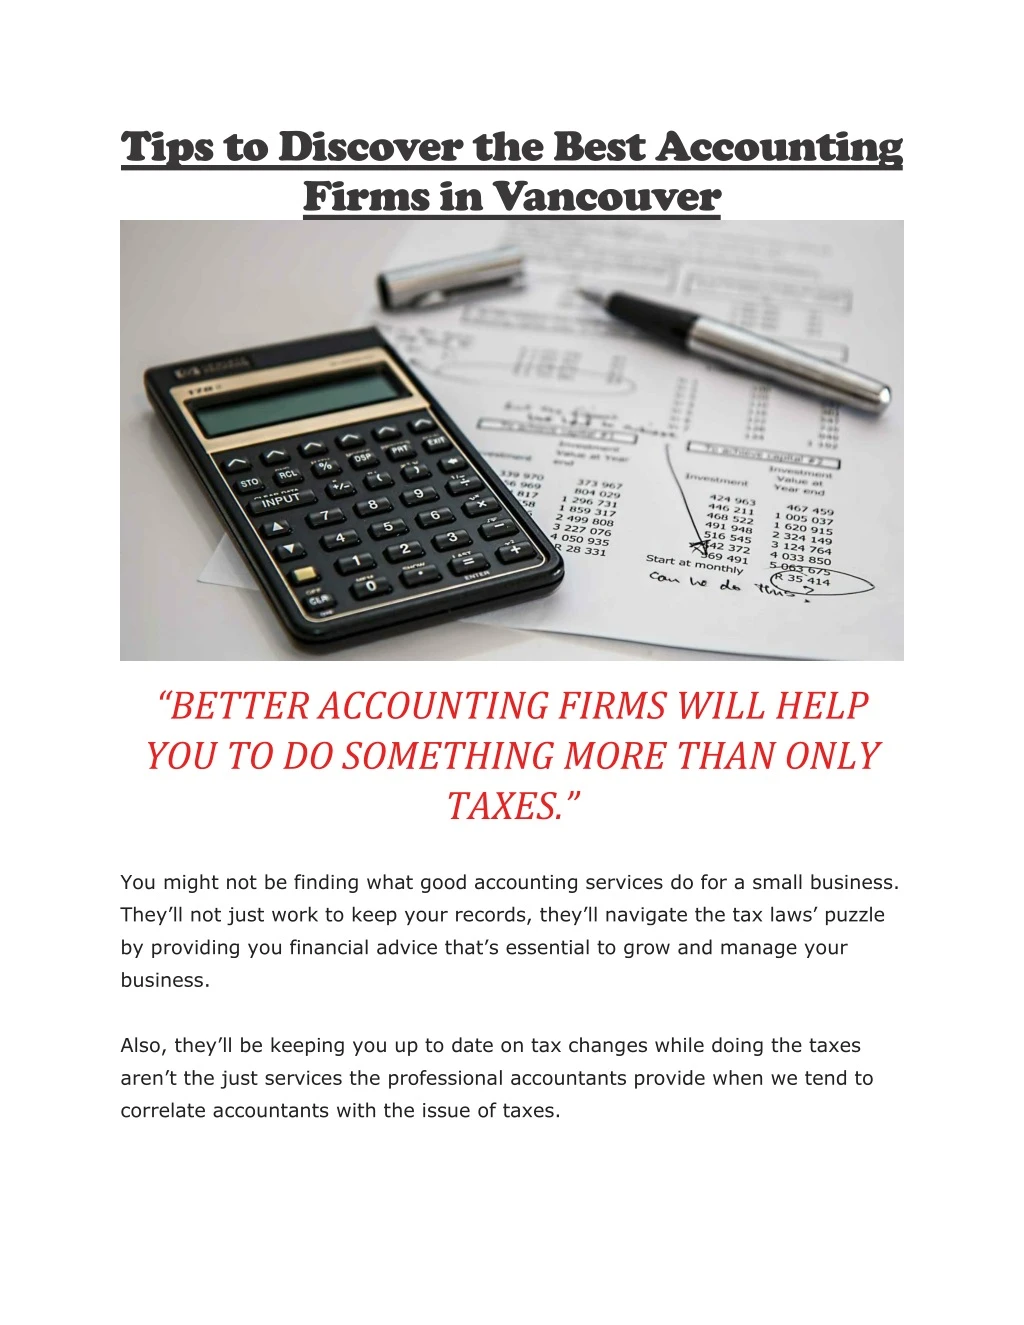 tips to discover the best accounting firms